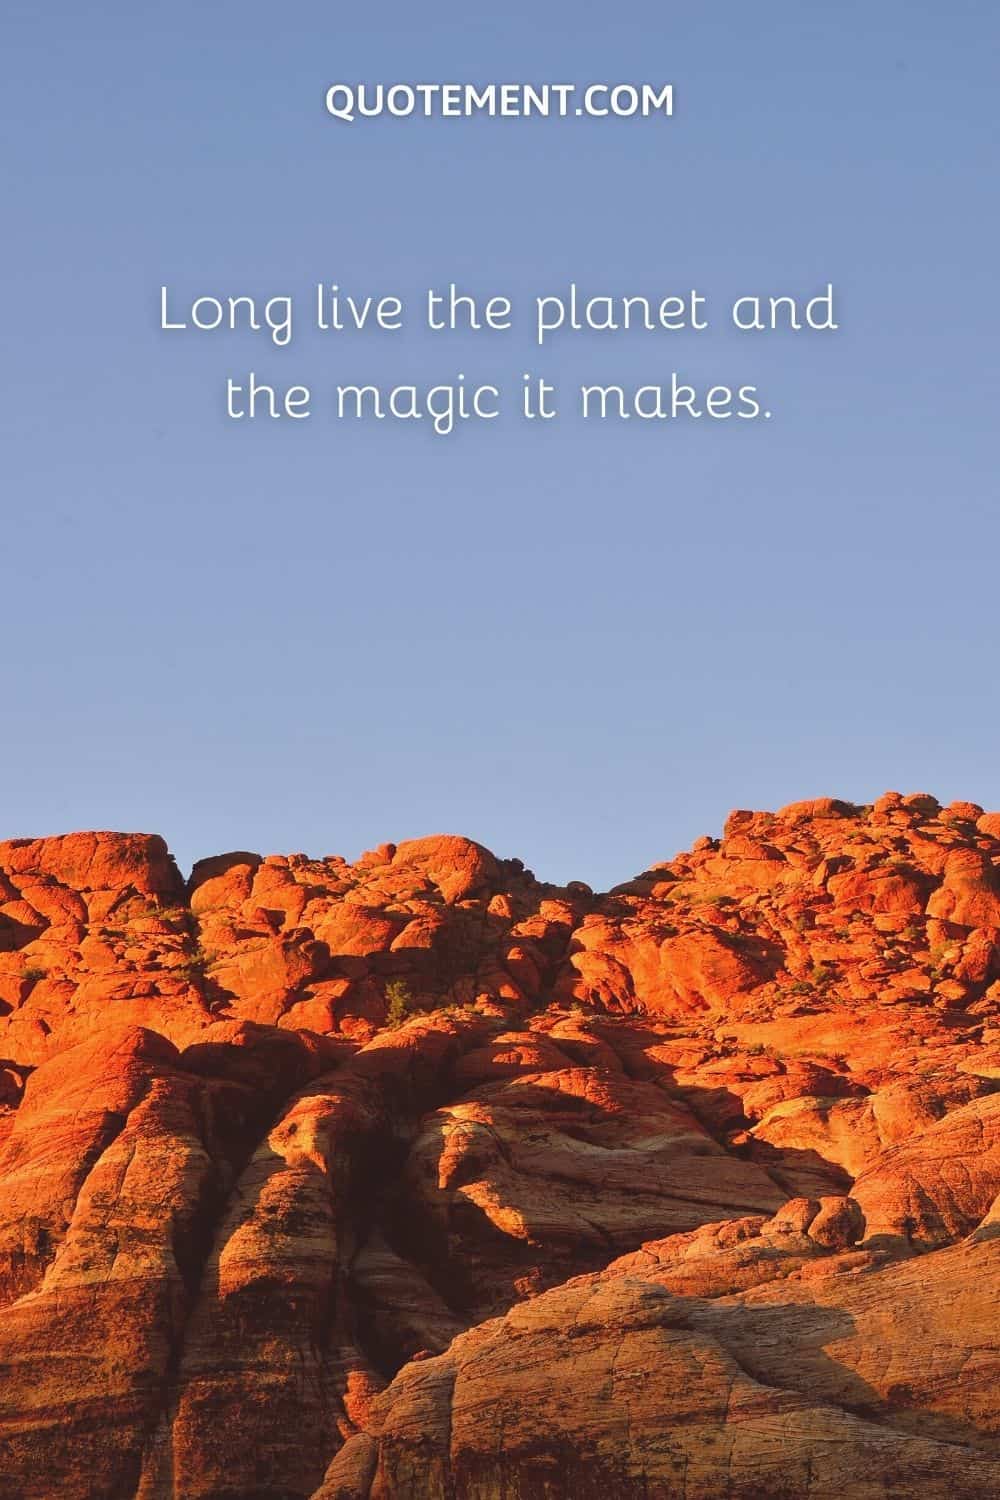 Long live the planet and the magic it makes.